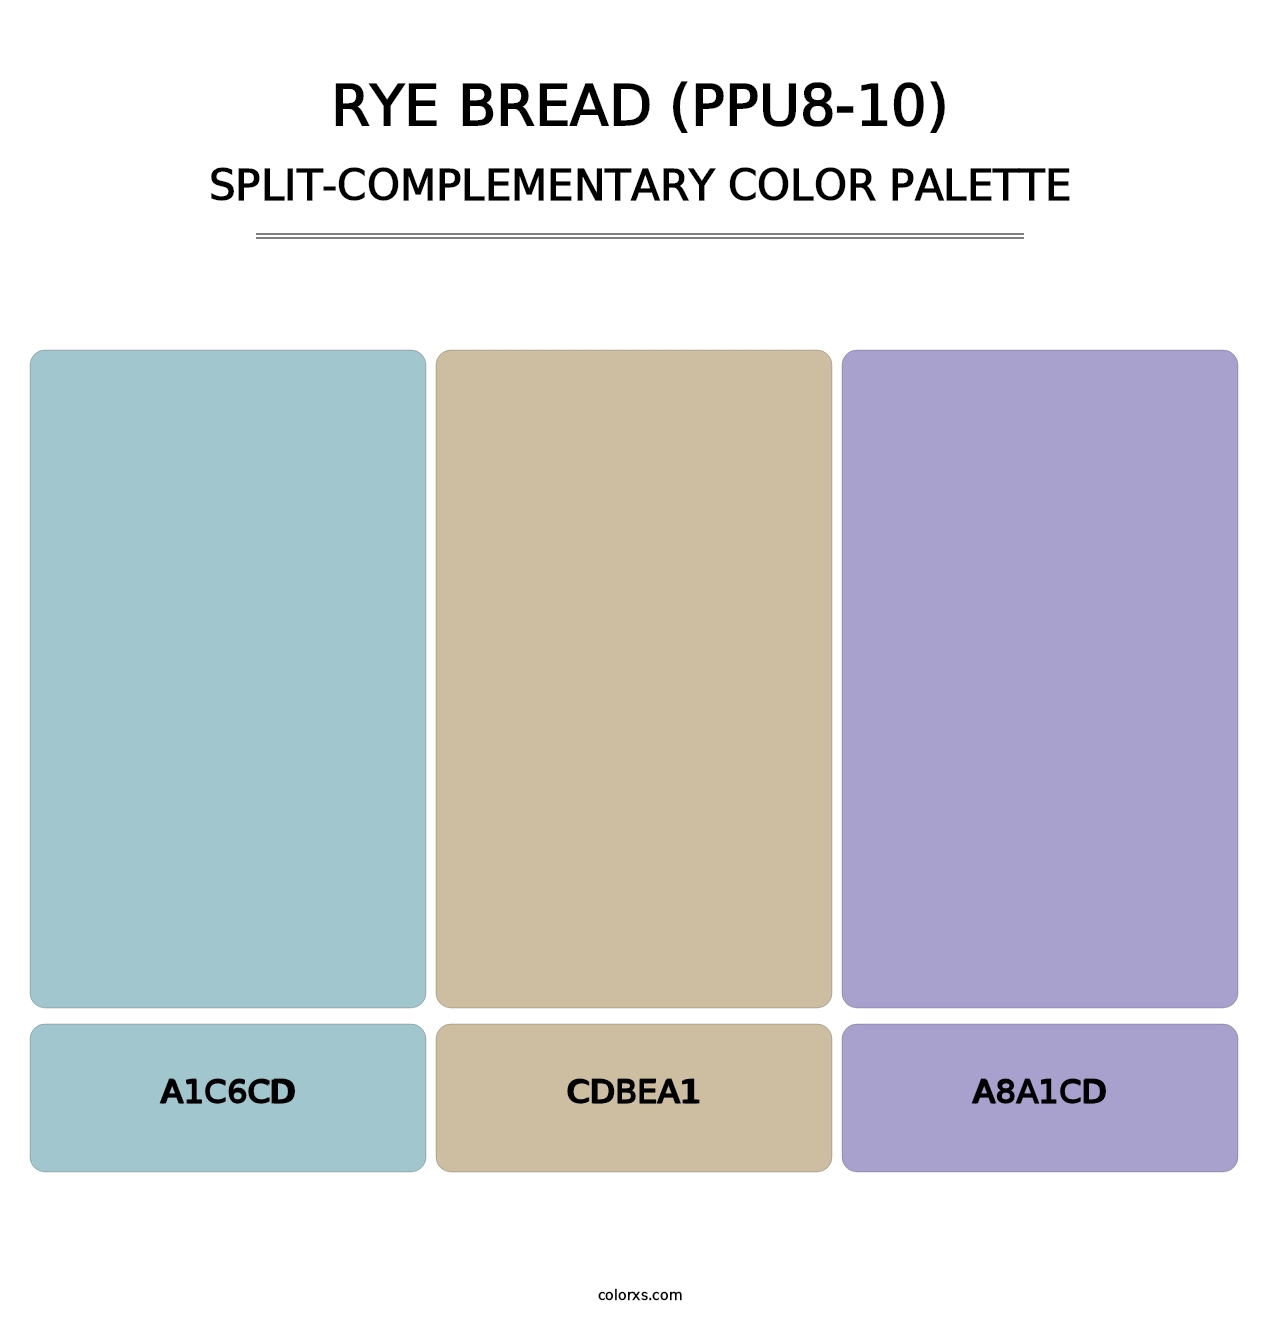 Rye Bread (PPU8-10) - Split-Complementary Color Palette